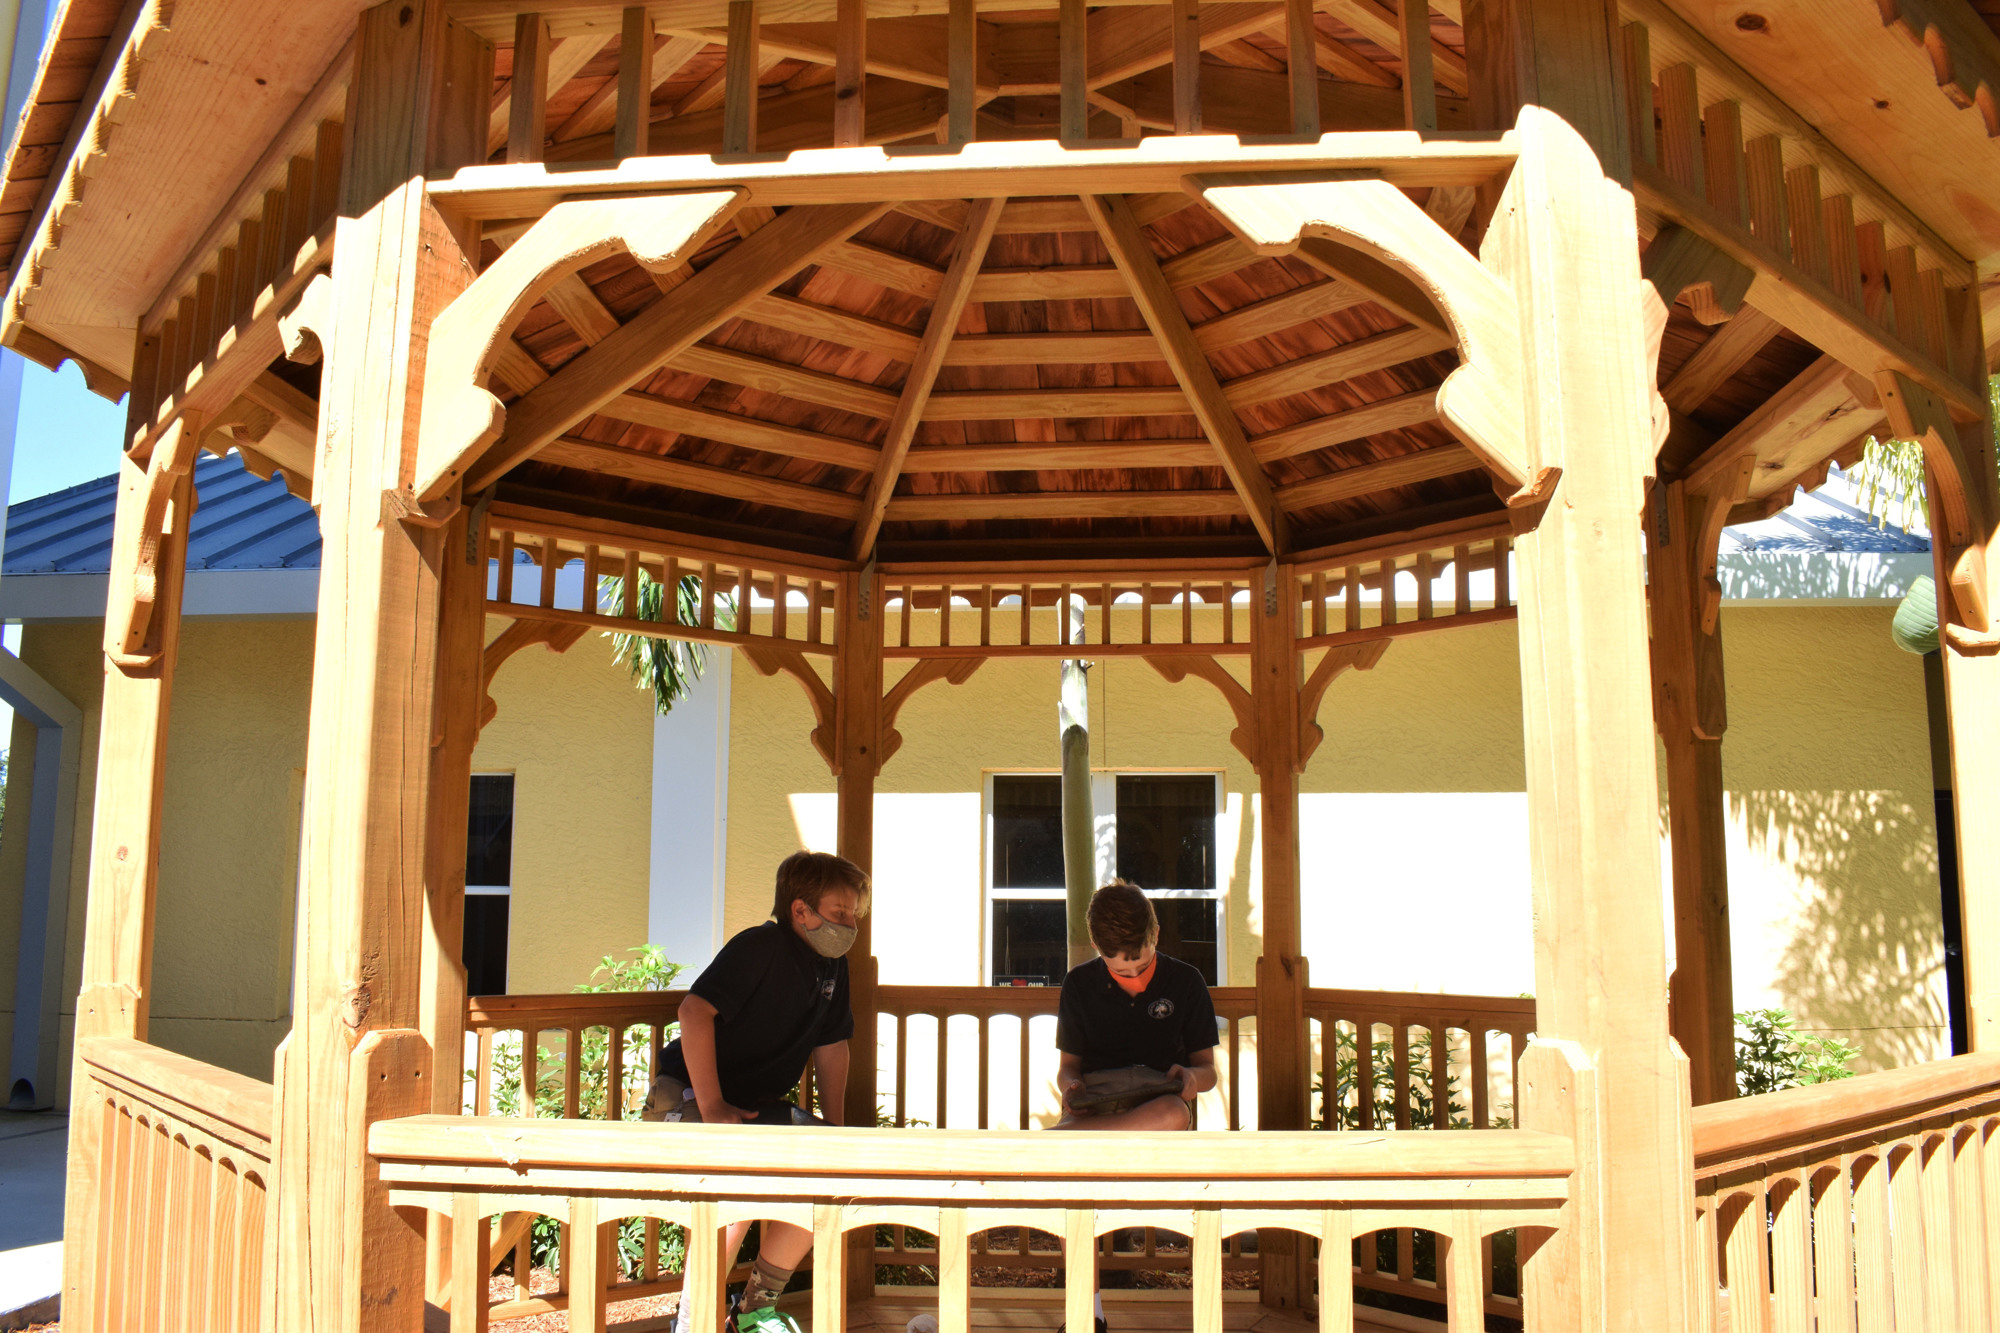 Sixth graders Wilkes Borden and Nathan Crews work on a health assignment in the gazebo on campus.